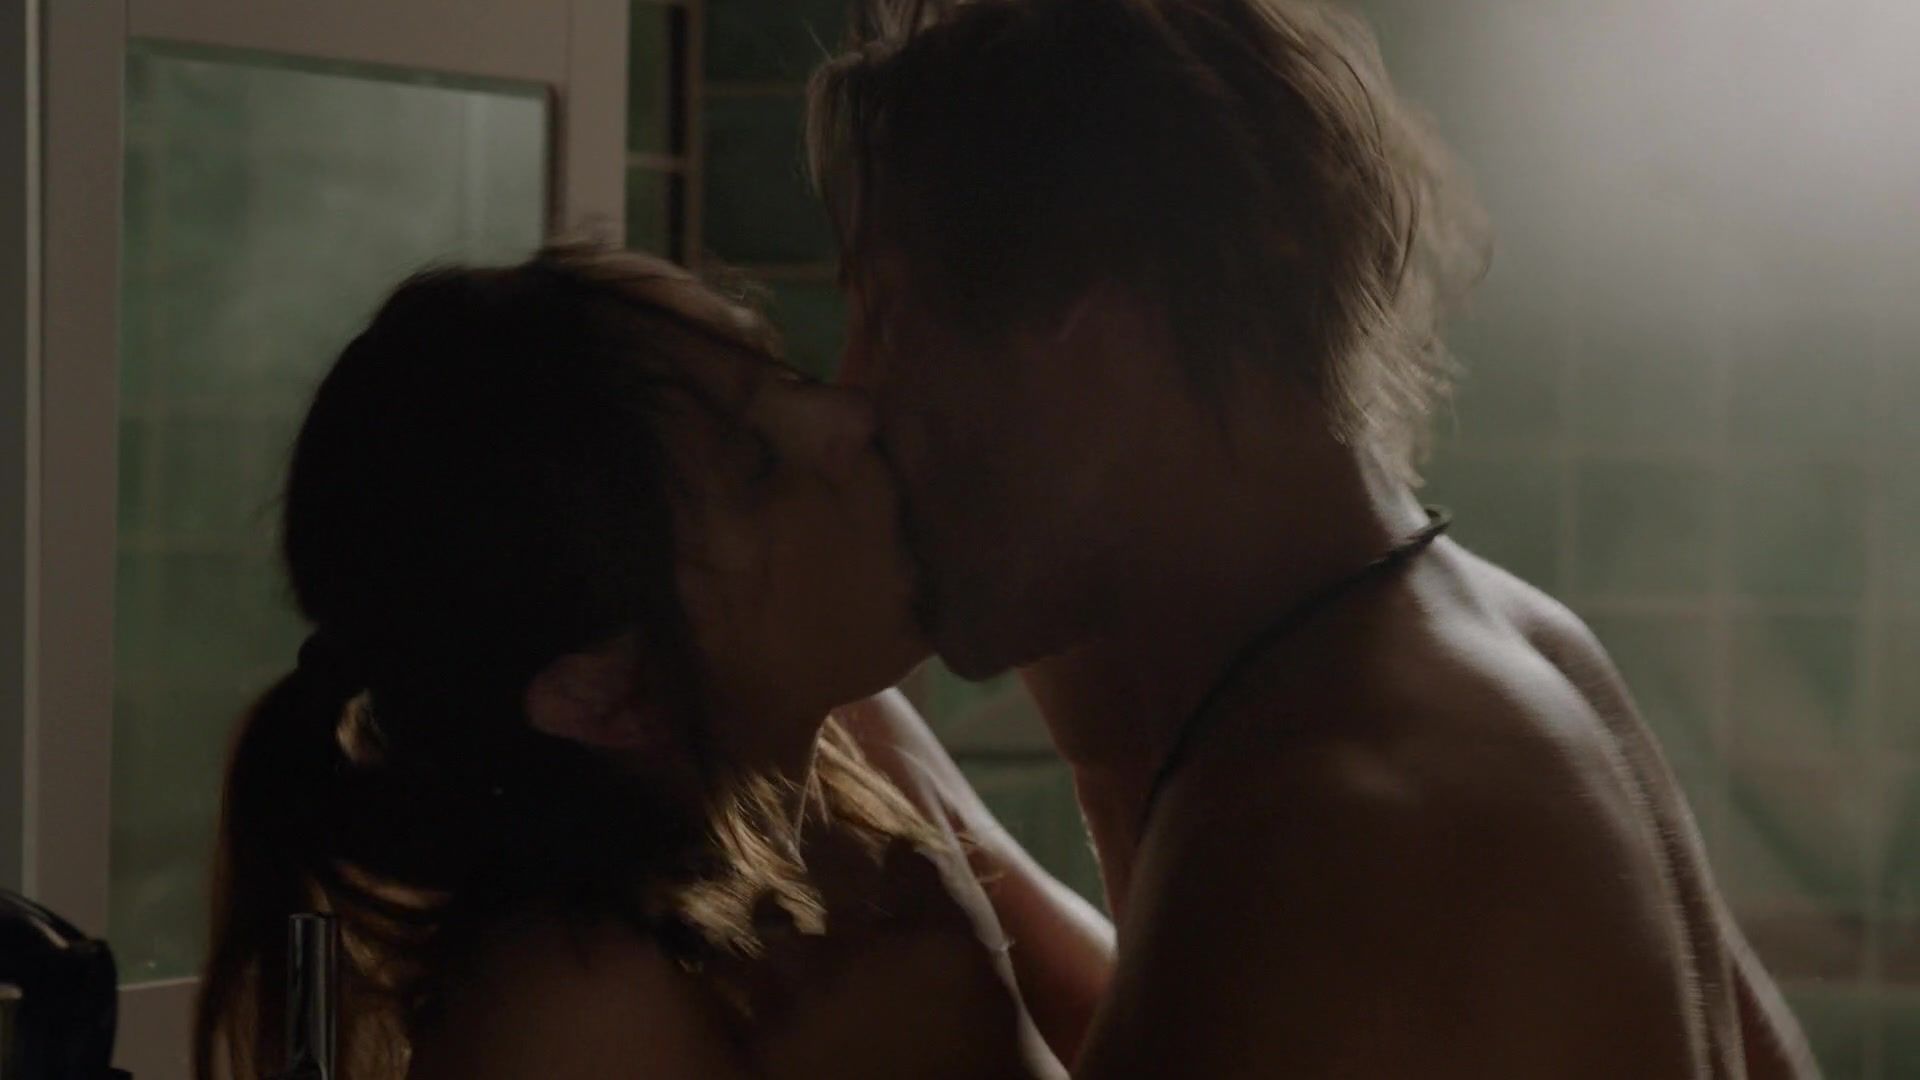 Dick Sucking Porn Naked Sarah Wayne Callies in Sex Scene from the TV show "Colony" s01e03 (2016) Celebrity - 1